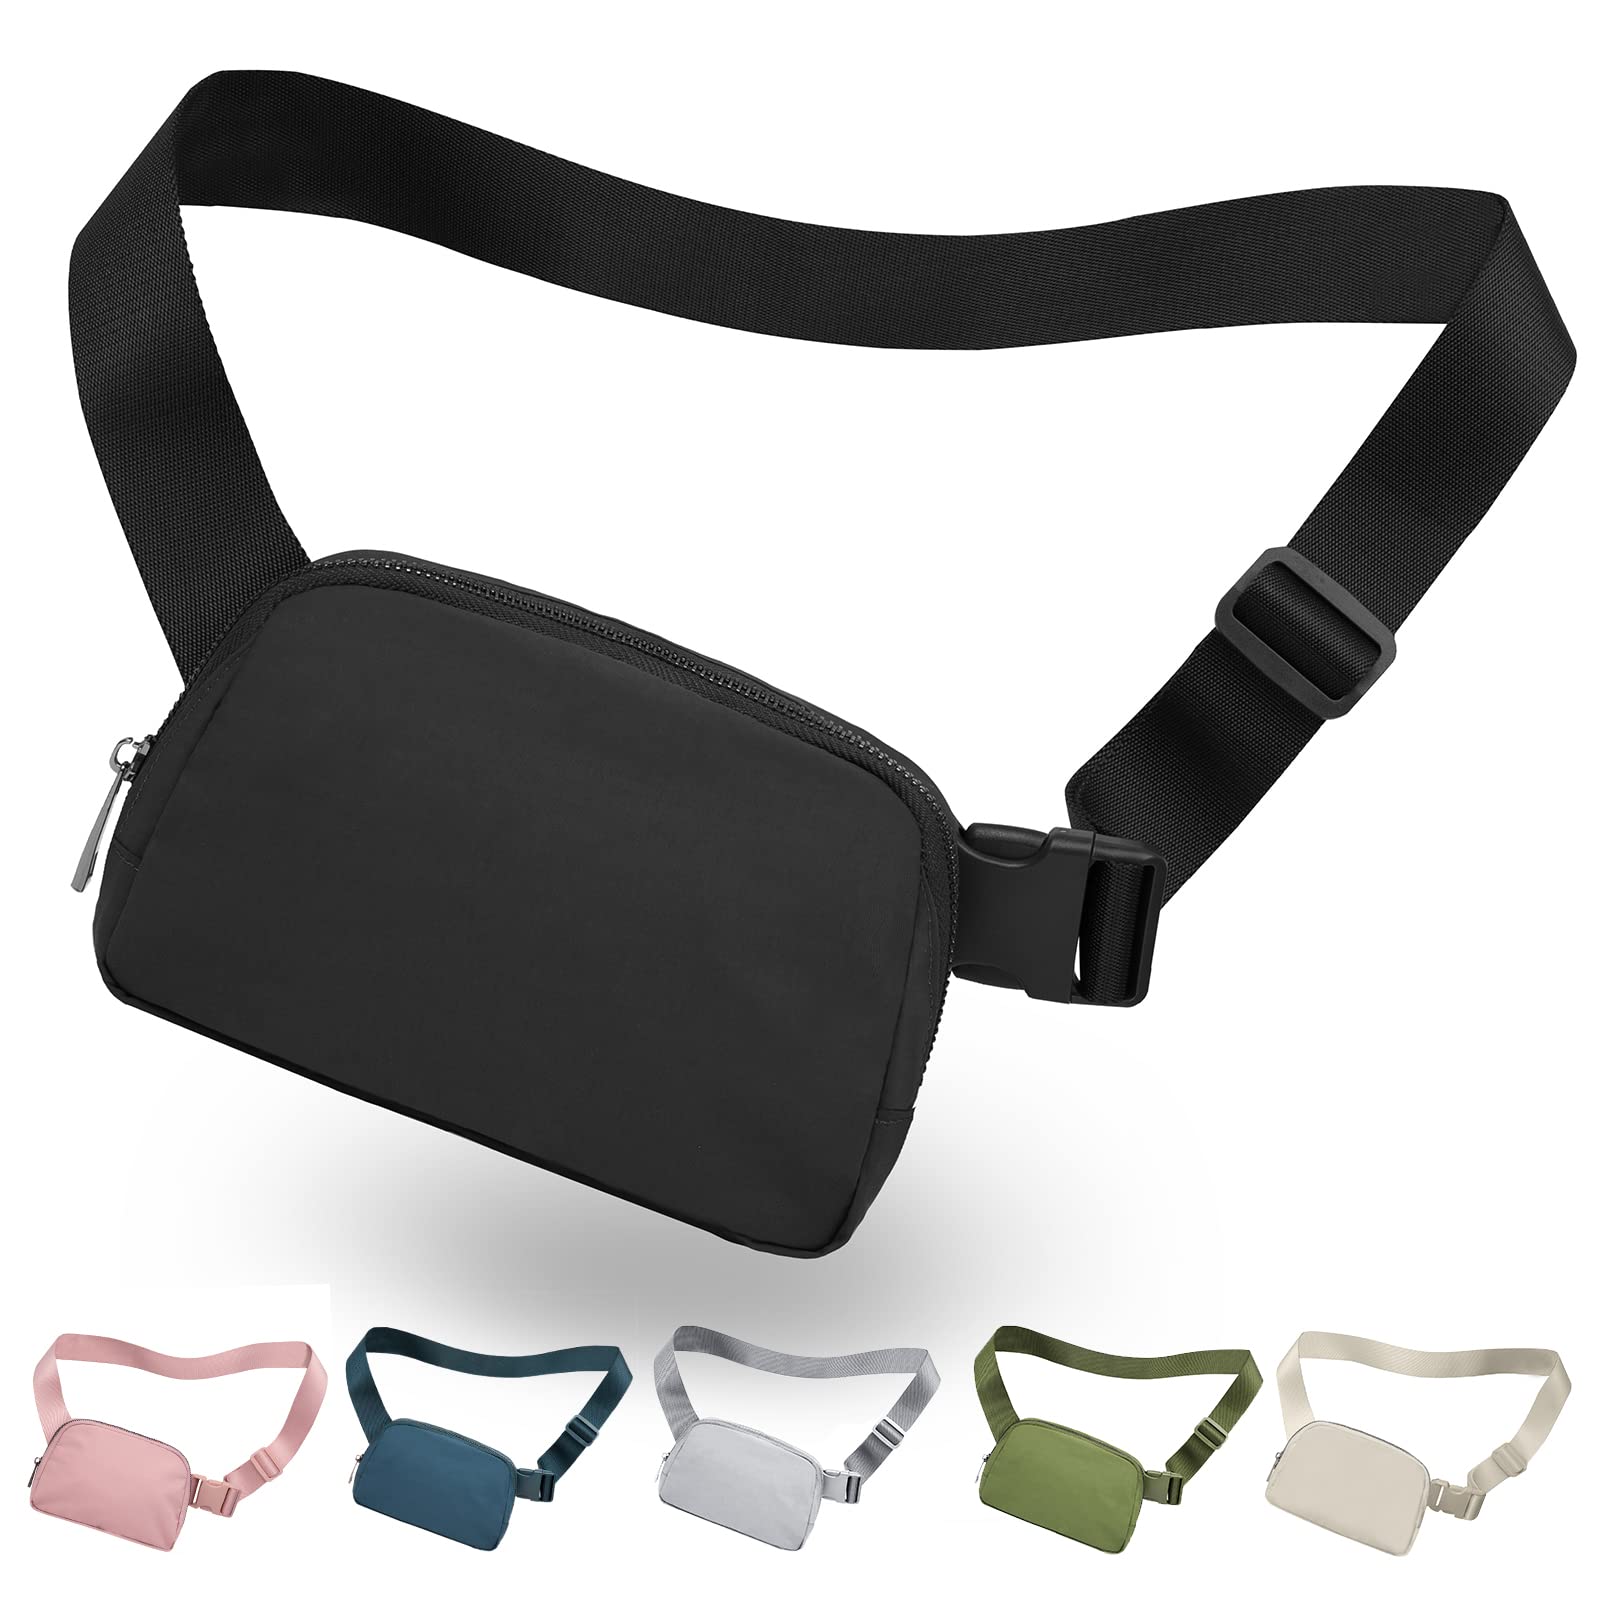 Buy Fanny Pack for Women Men Fashion Small Waist Bag Belt Bag with  Adjustable Strap for Travel Hiking Running, Black, One Size at